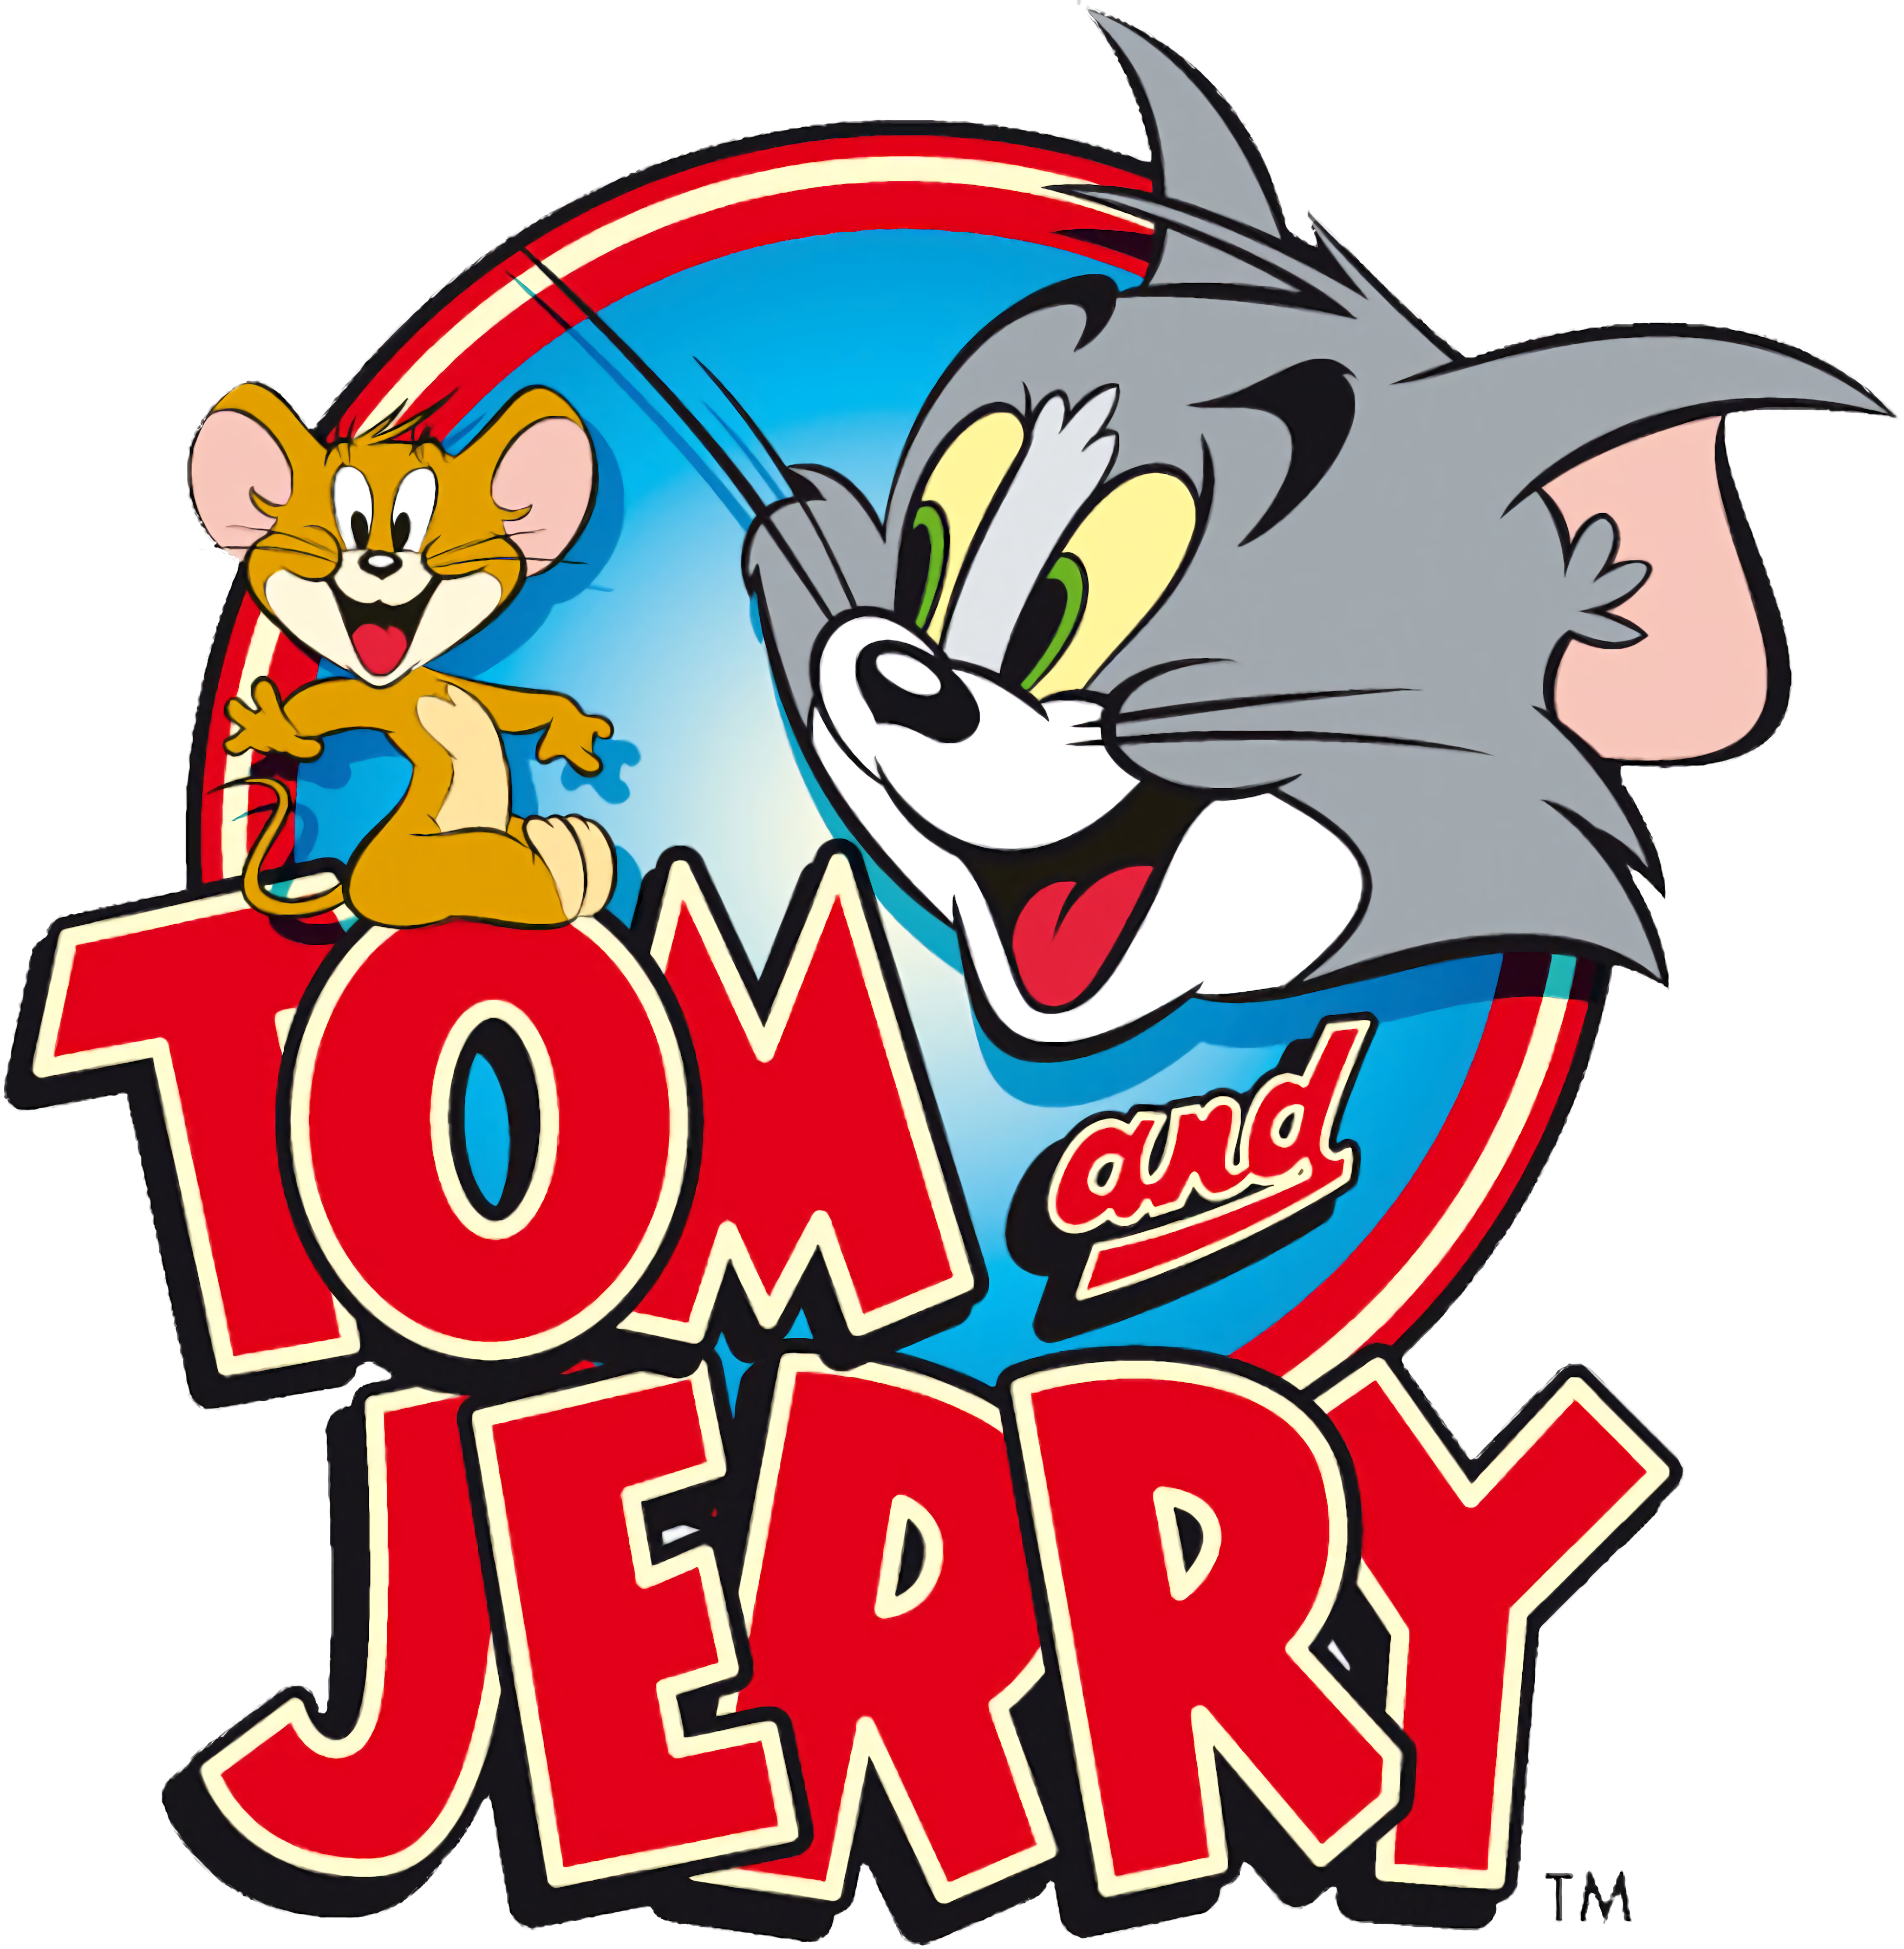 Tom and Jerry Games - Play Online Games on Desura